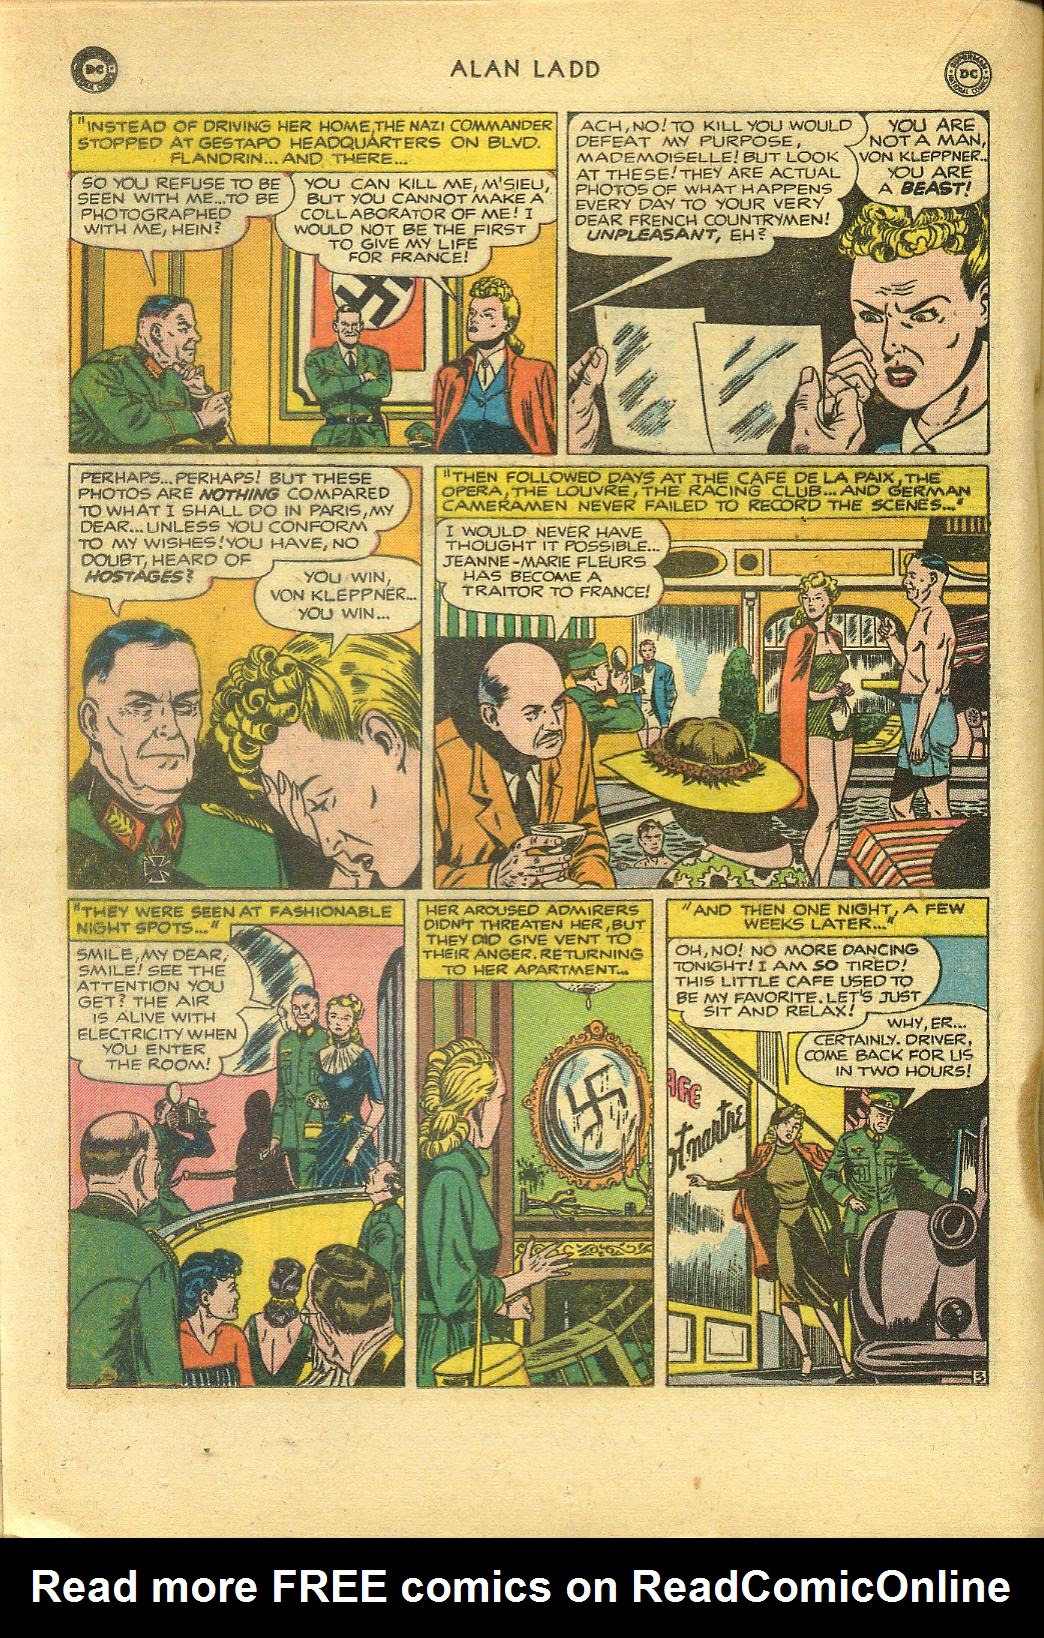 Read online Adventures of Alan Ladd comic -  Issue #3 - 28